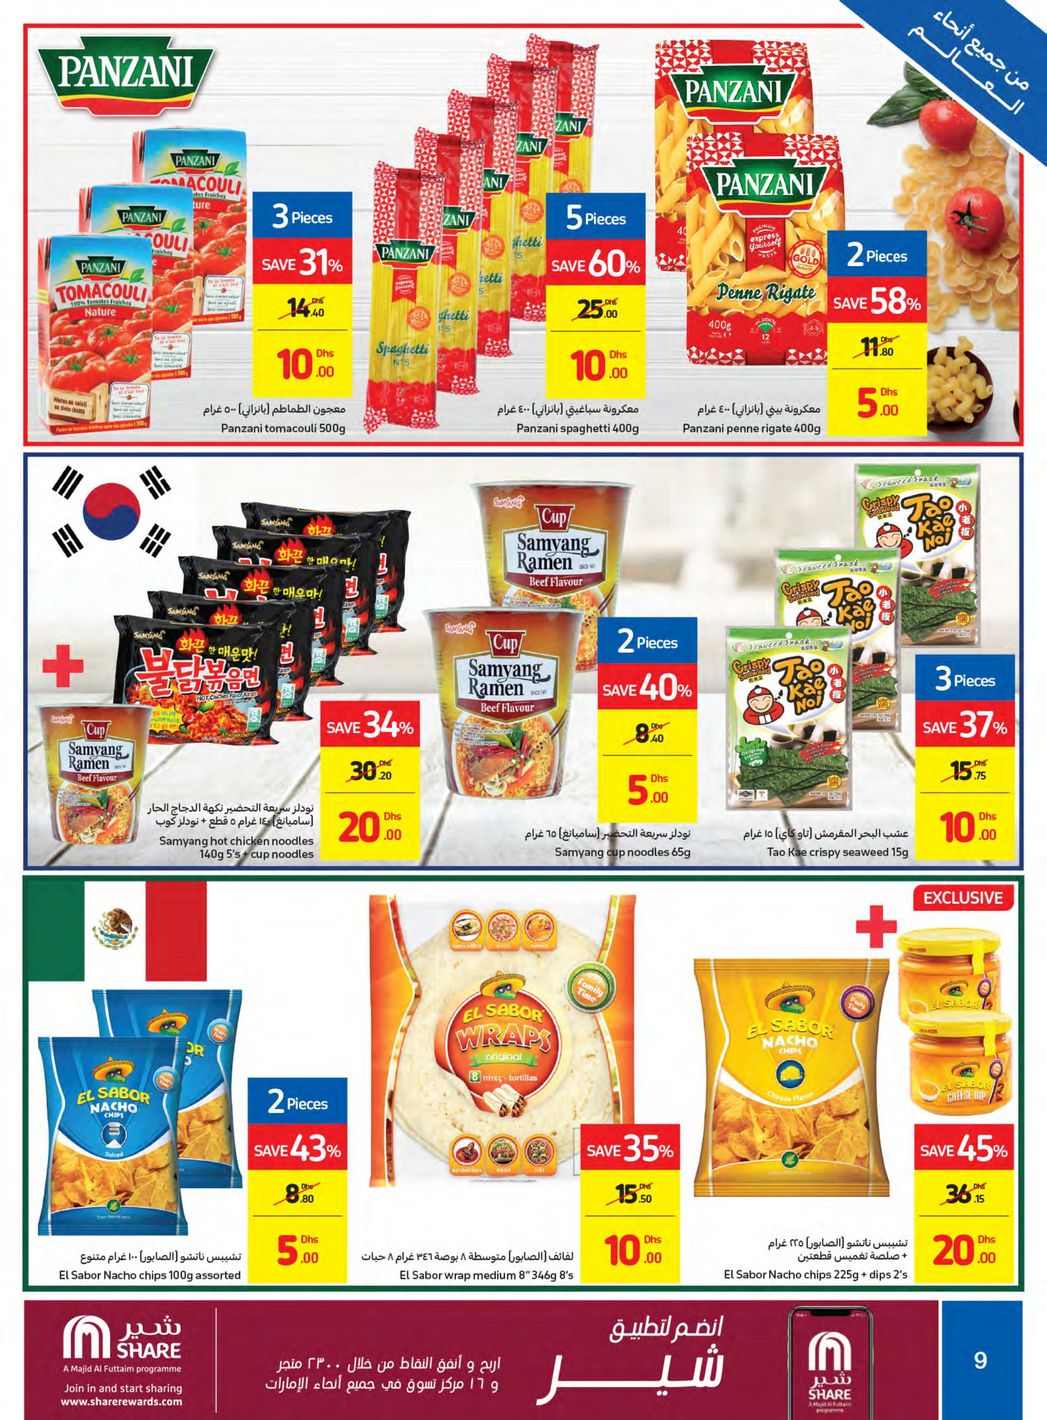 Carrefour Offers from 13/2 till 23/2 | Carrefour UAE 10